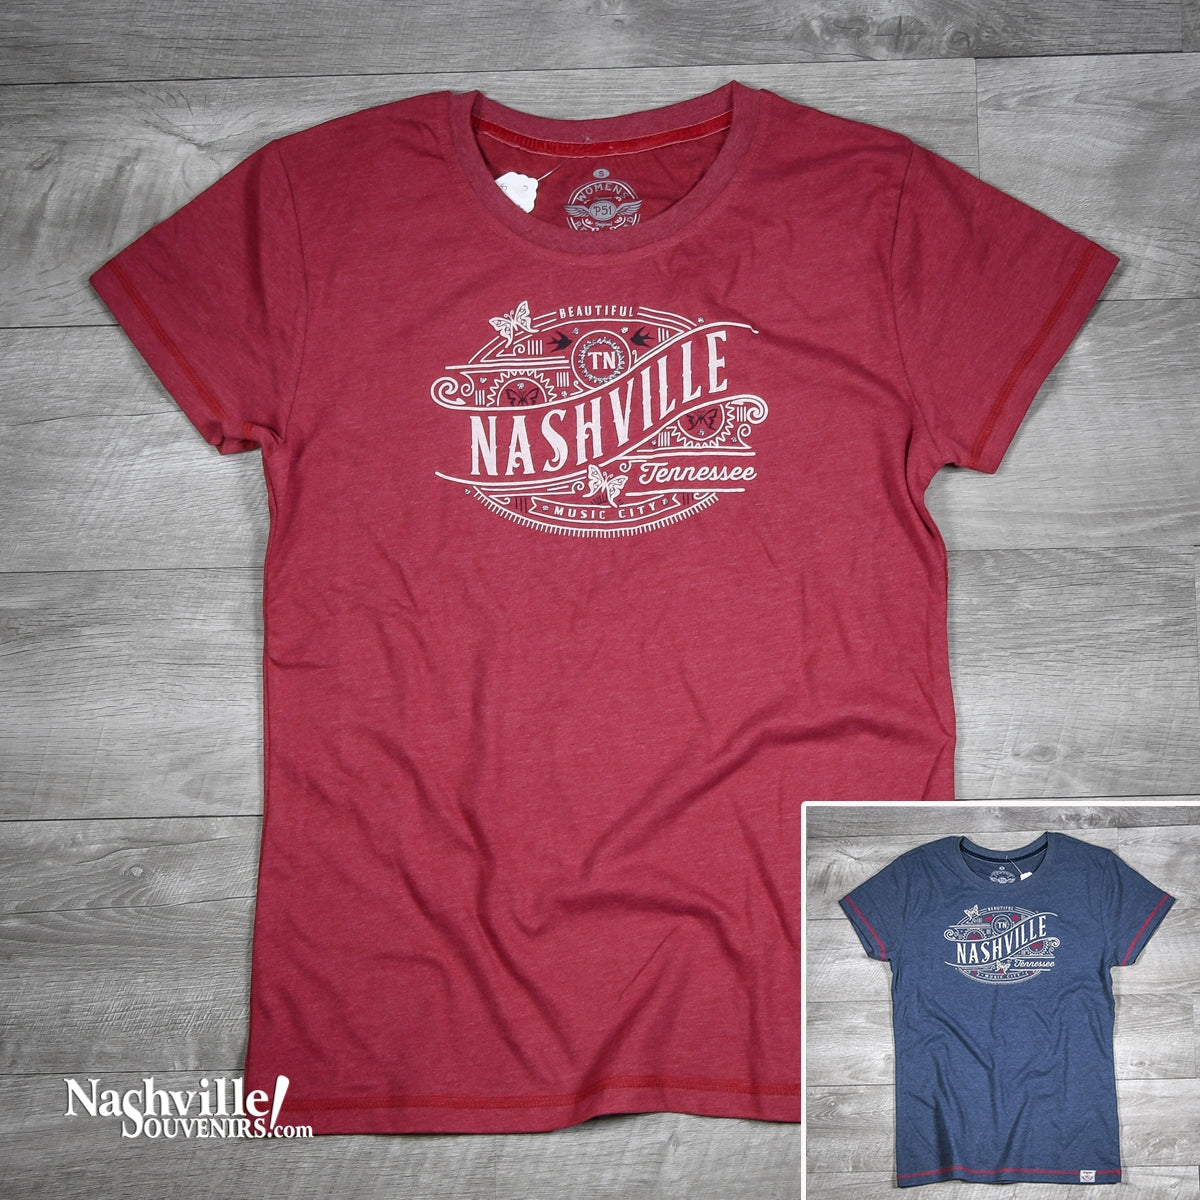 Our brand new ladies Nashville shirt design created for us by "Premium 51 Brand'. This beautiful ladies Nashville shirt is part of the women's red thread collection by EMI sportswear.